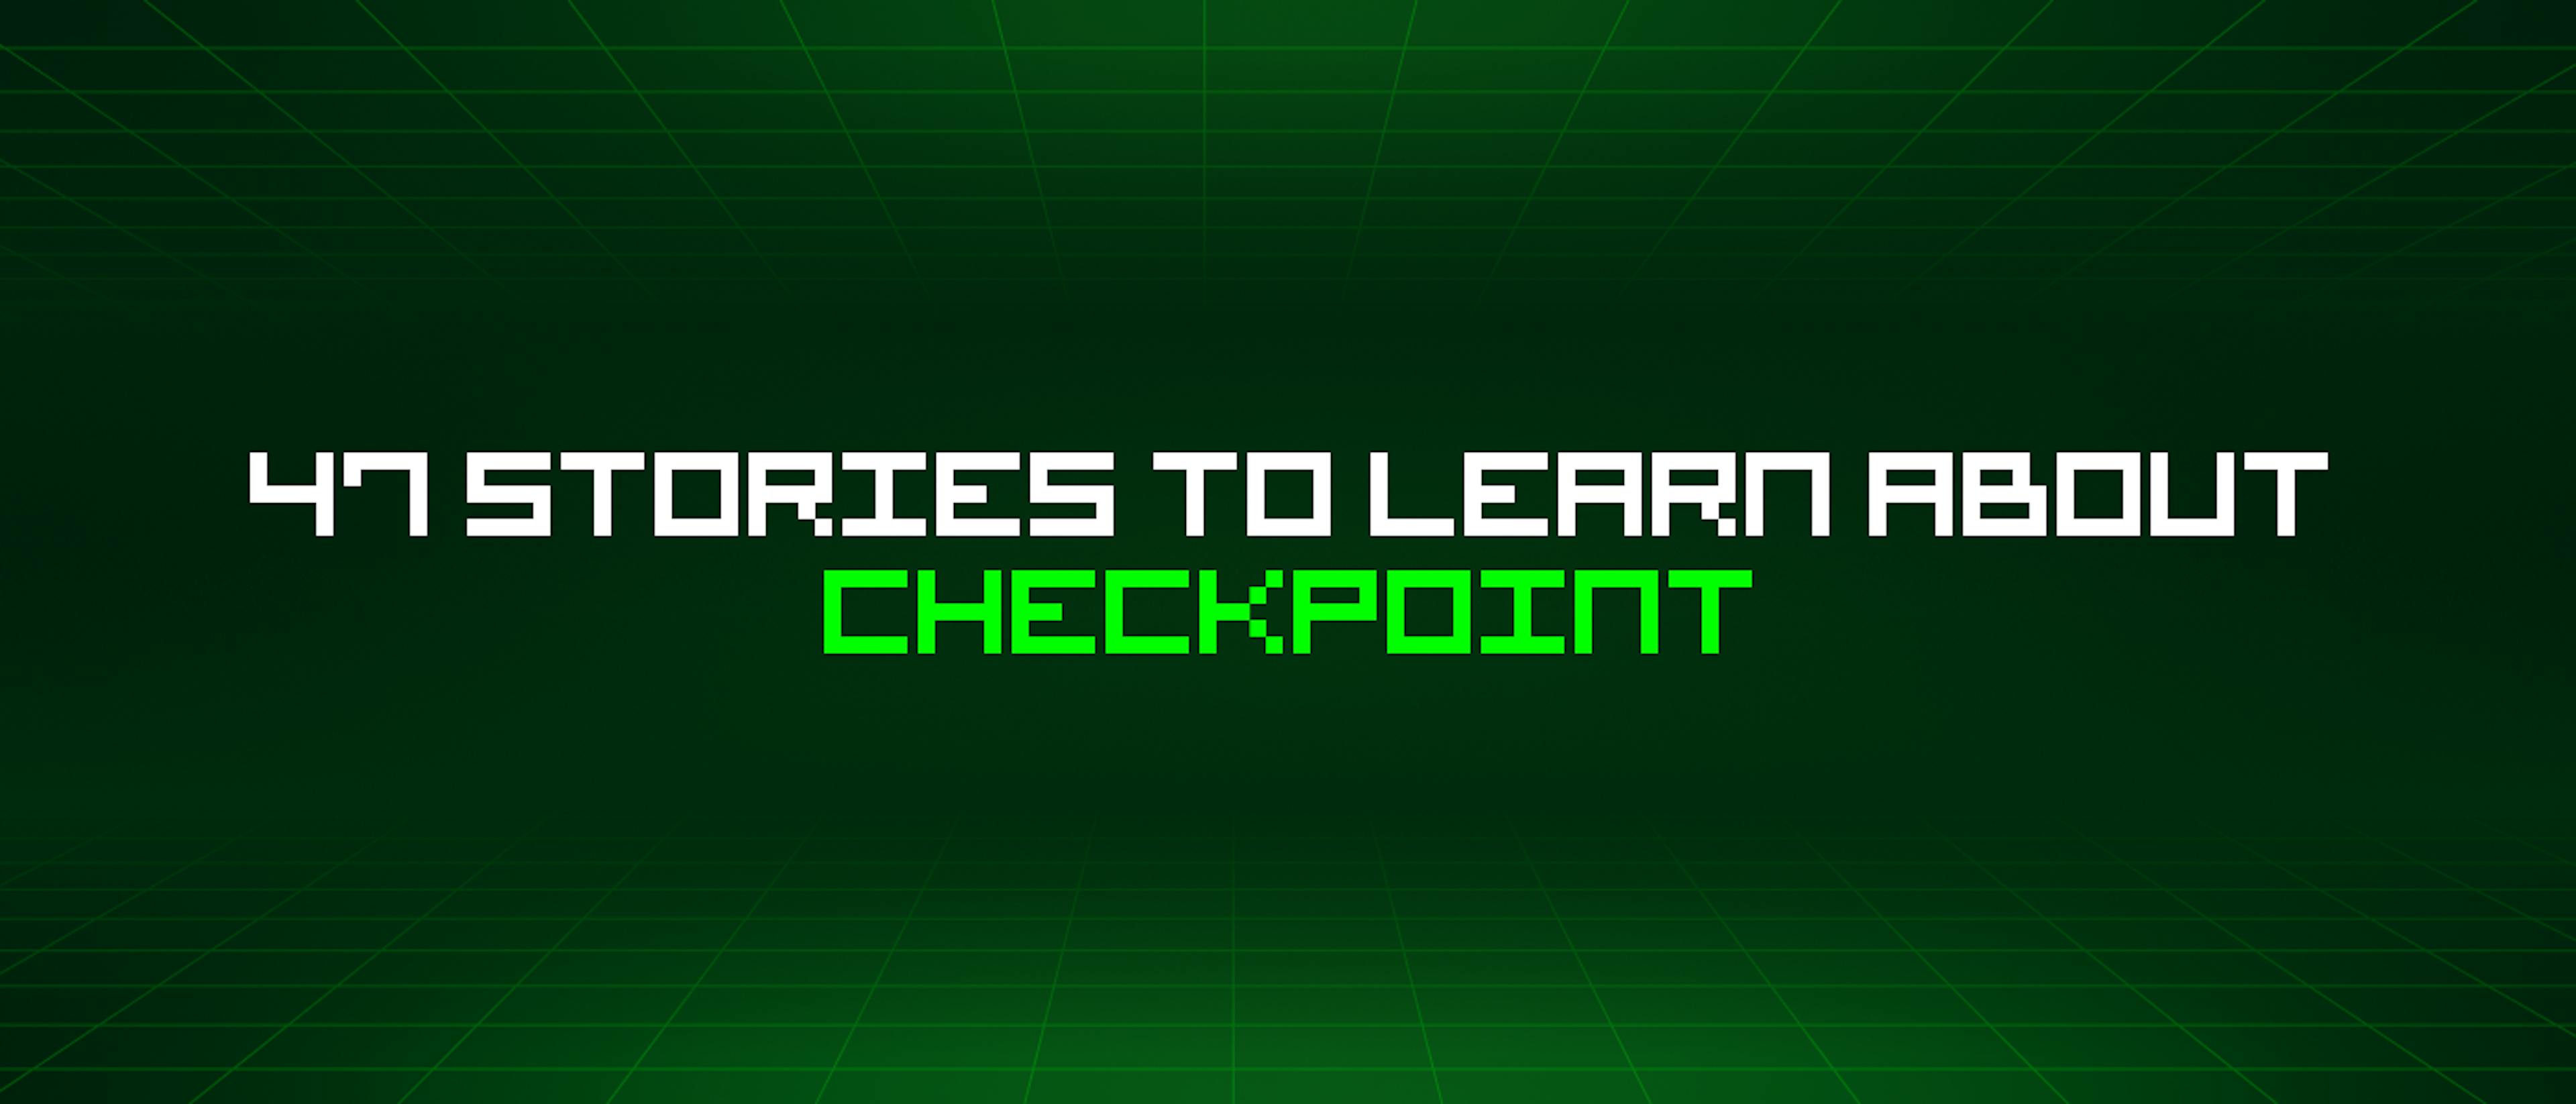 featured image - 47 Stories To Learn About Checkpoint